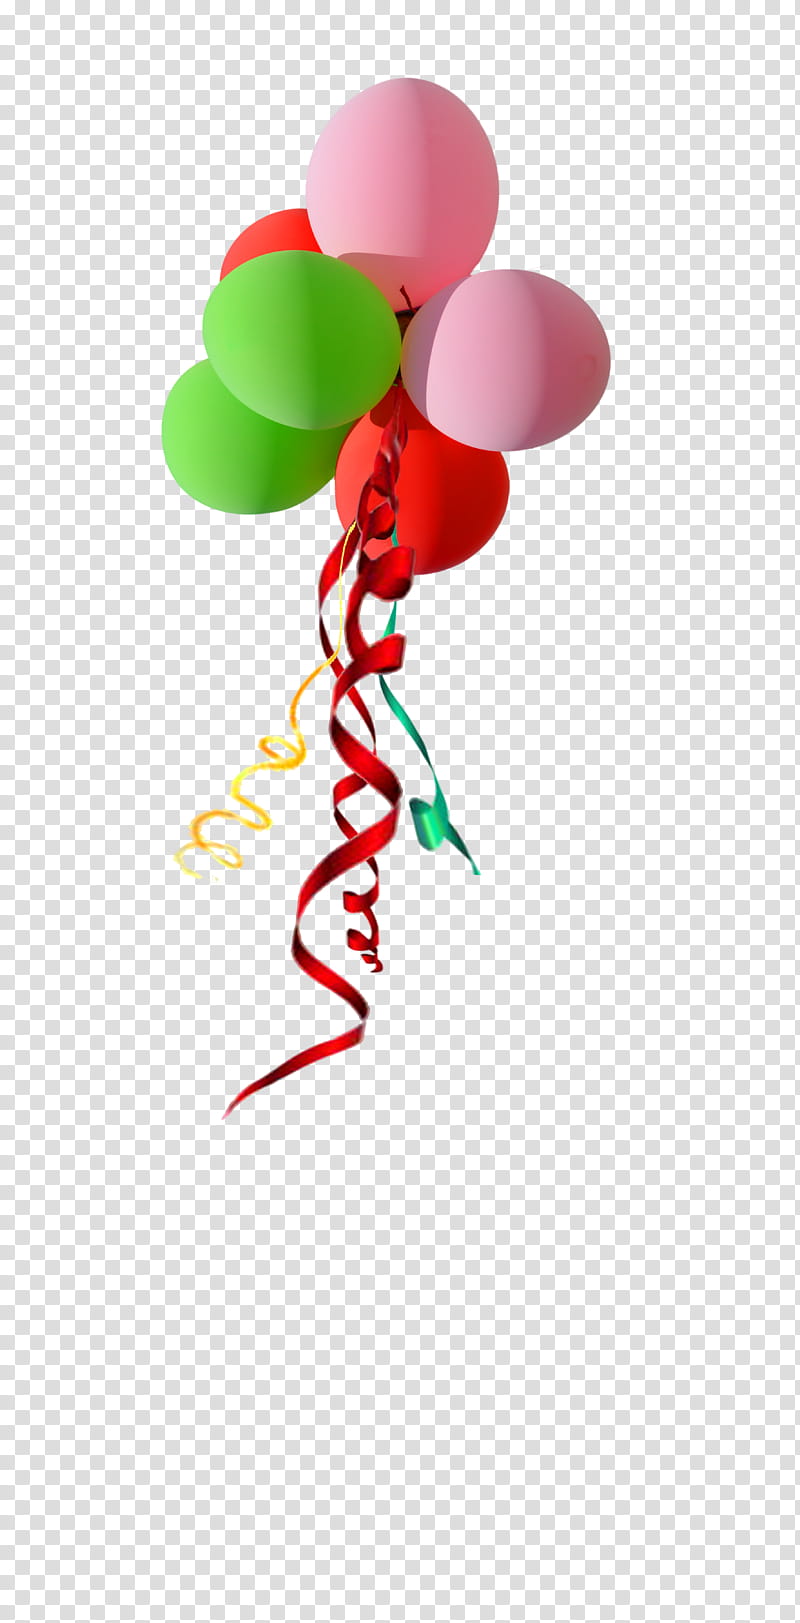 Ballon with Ribbons , assorted-color balloons transparent background PNG clipart